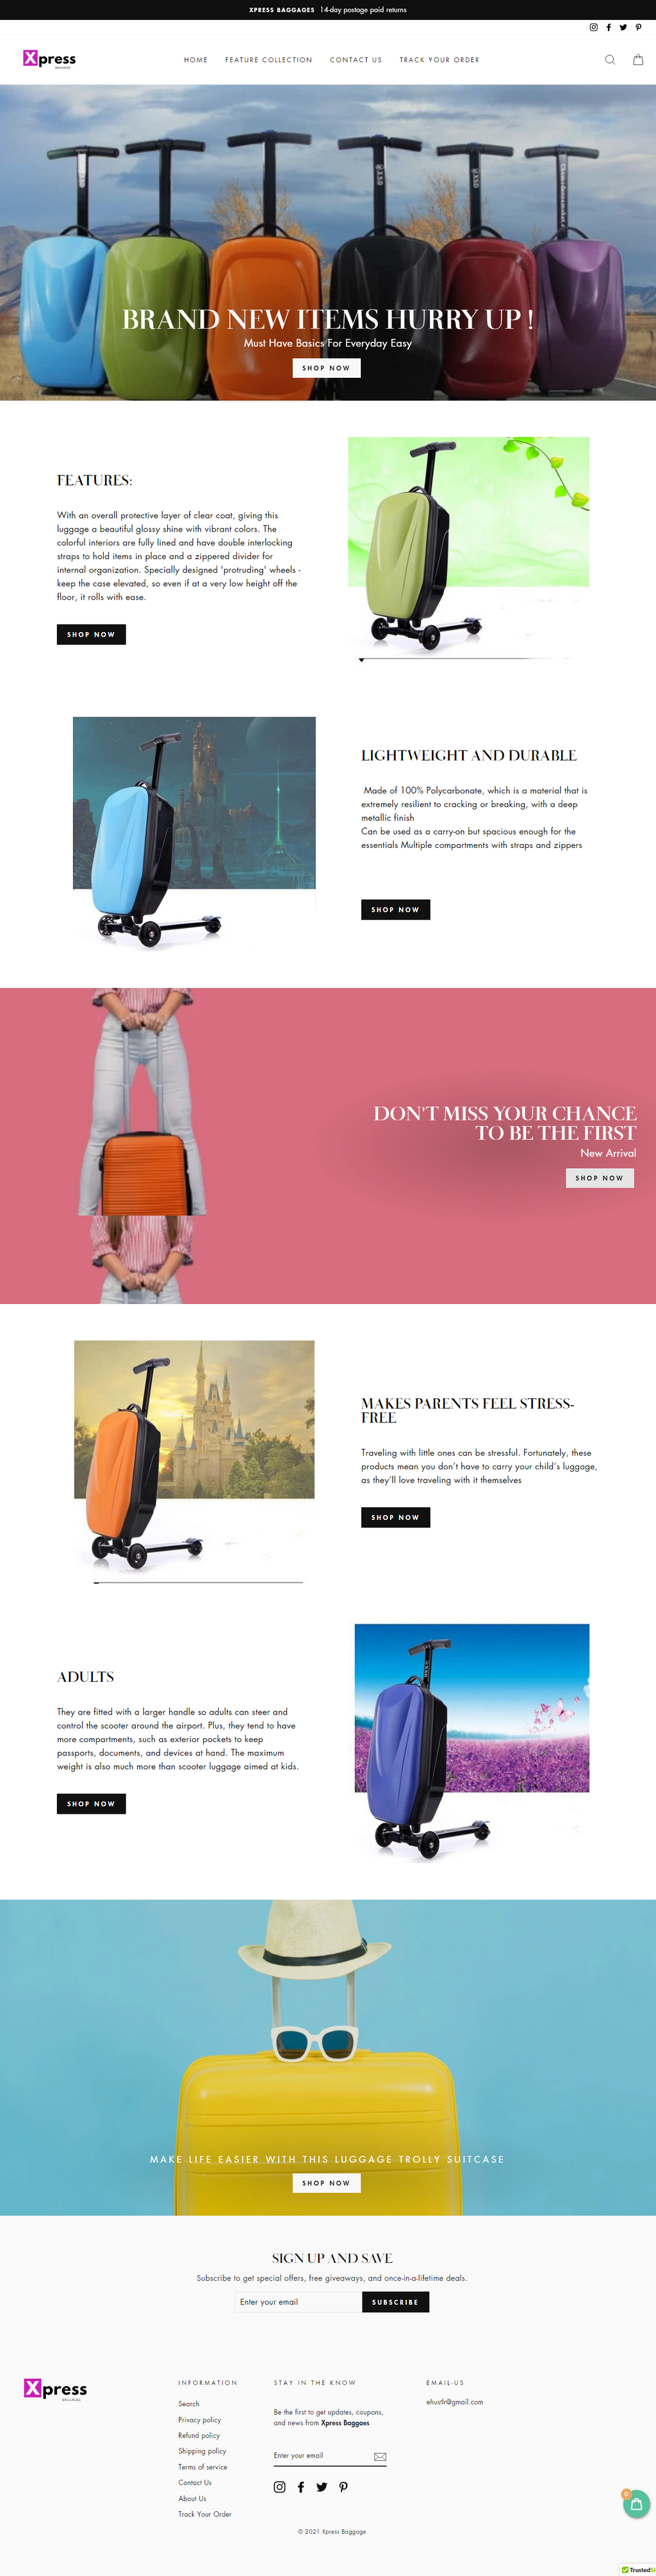 Scooter Suitcase Dropship Business - XpressBaggage.com